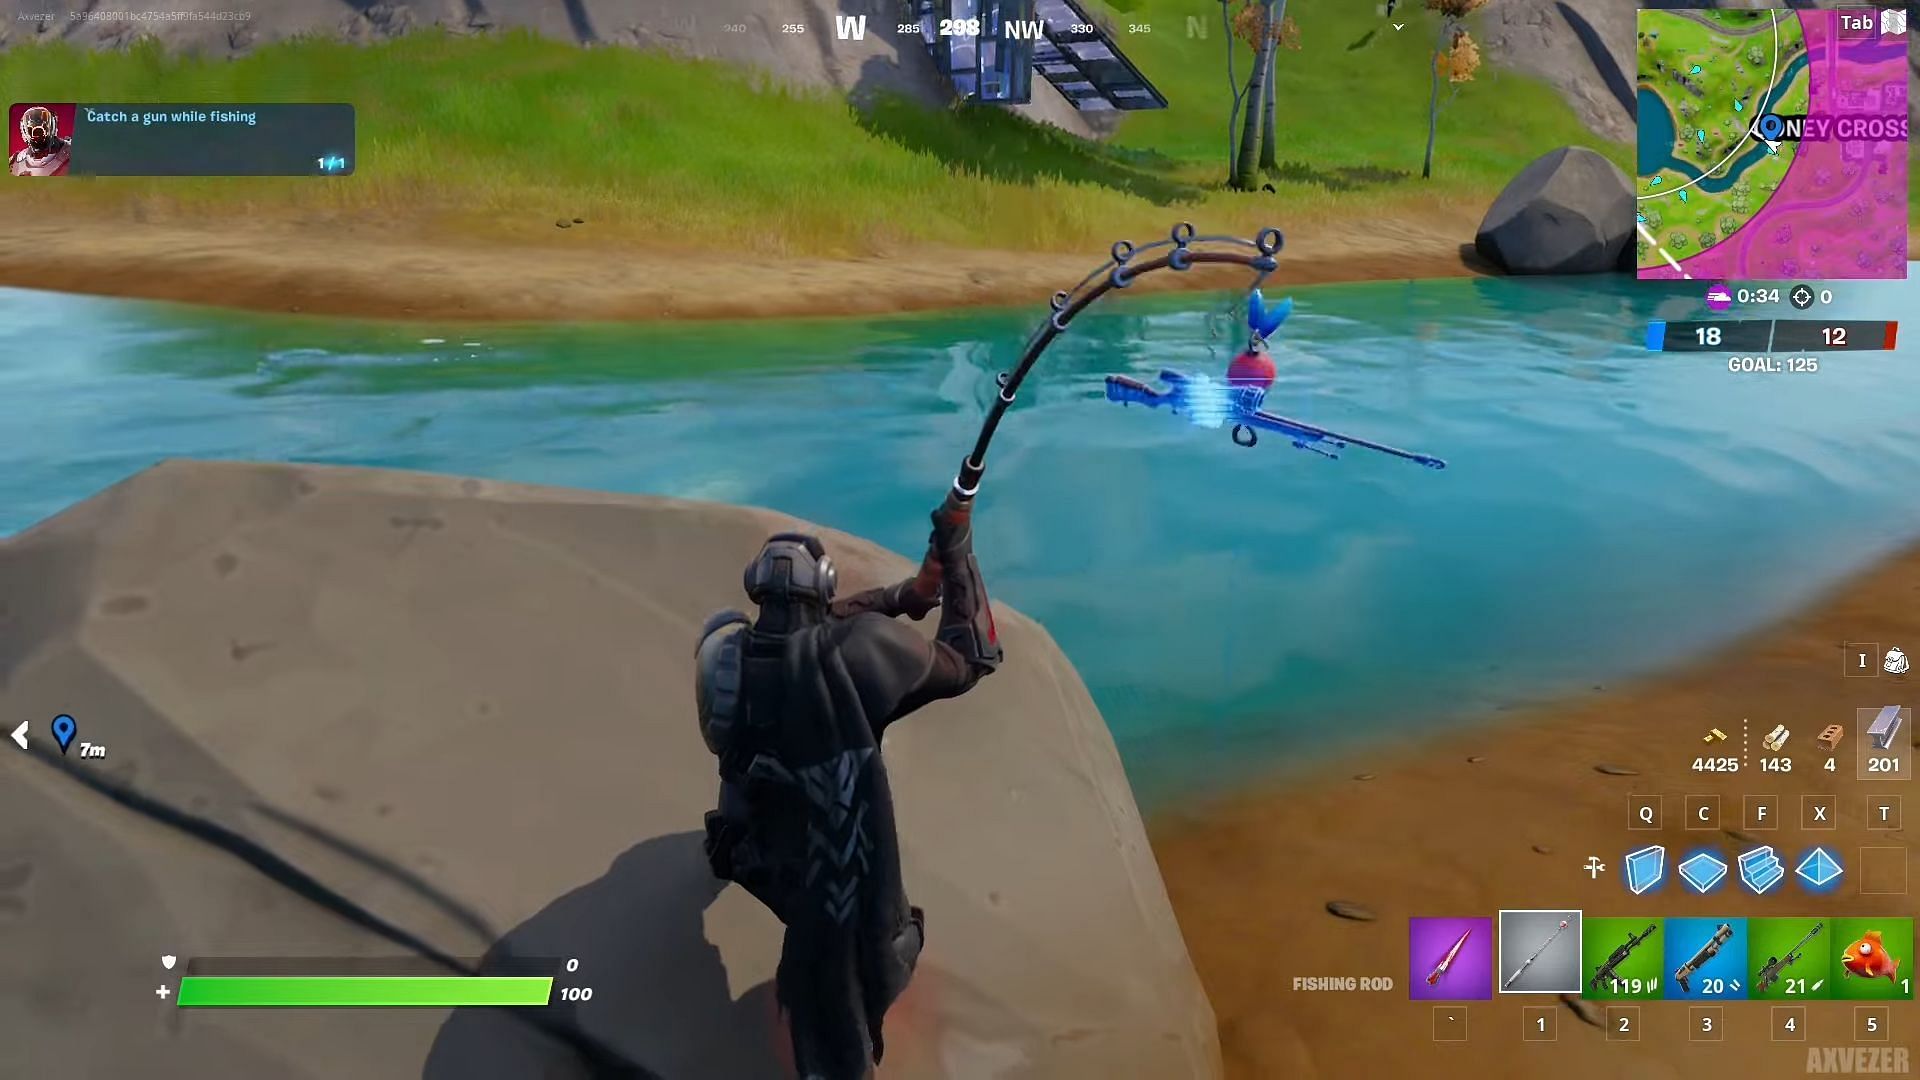 Fortnite: How to catch a gun while fishing